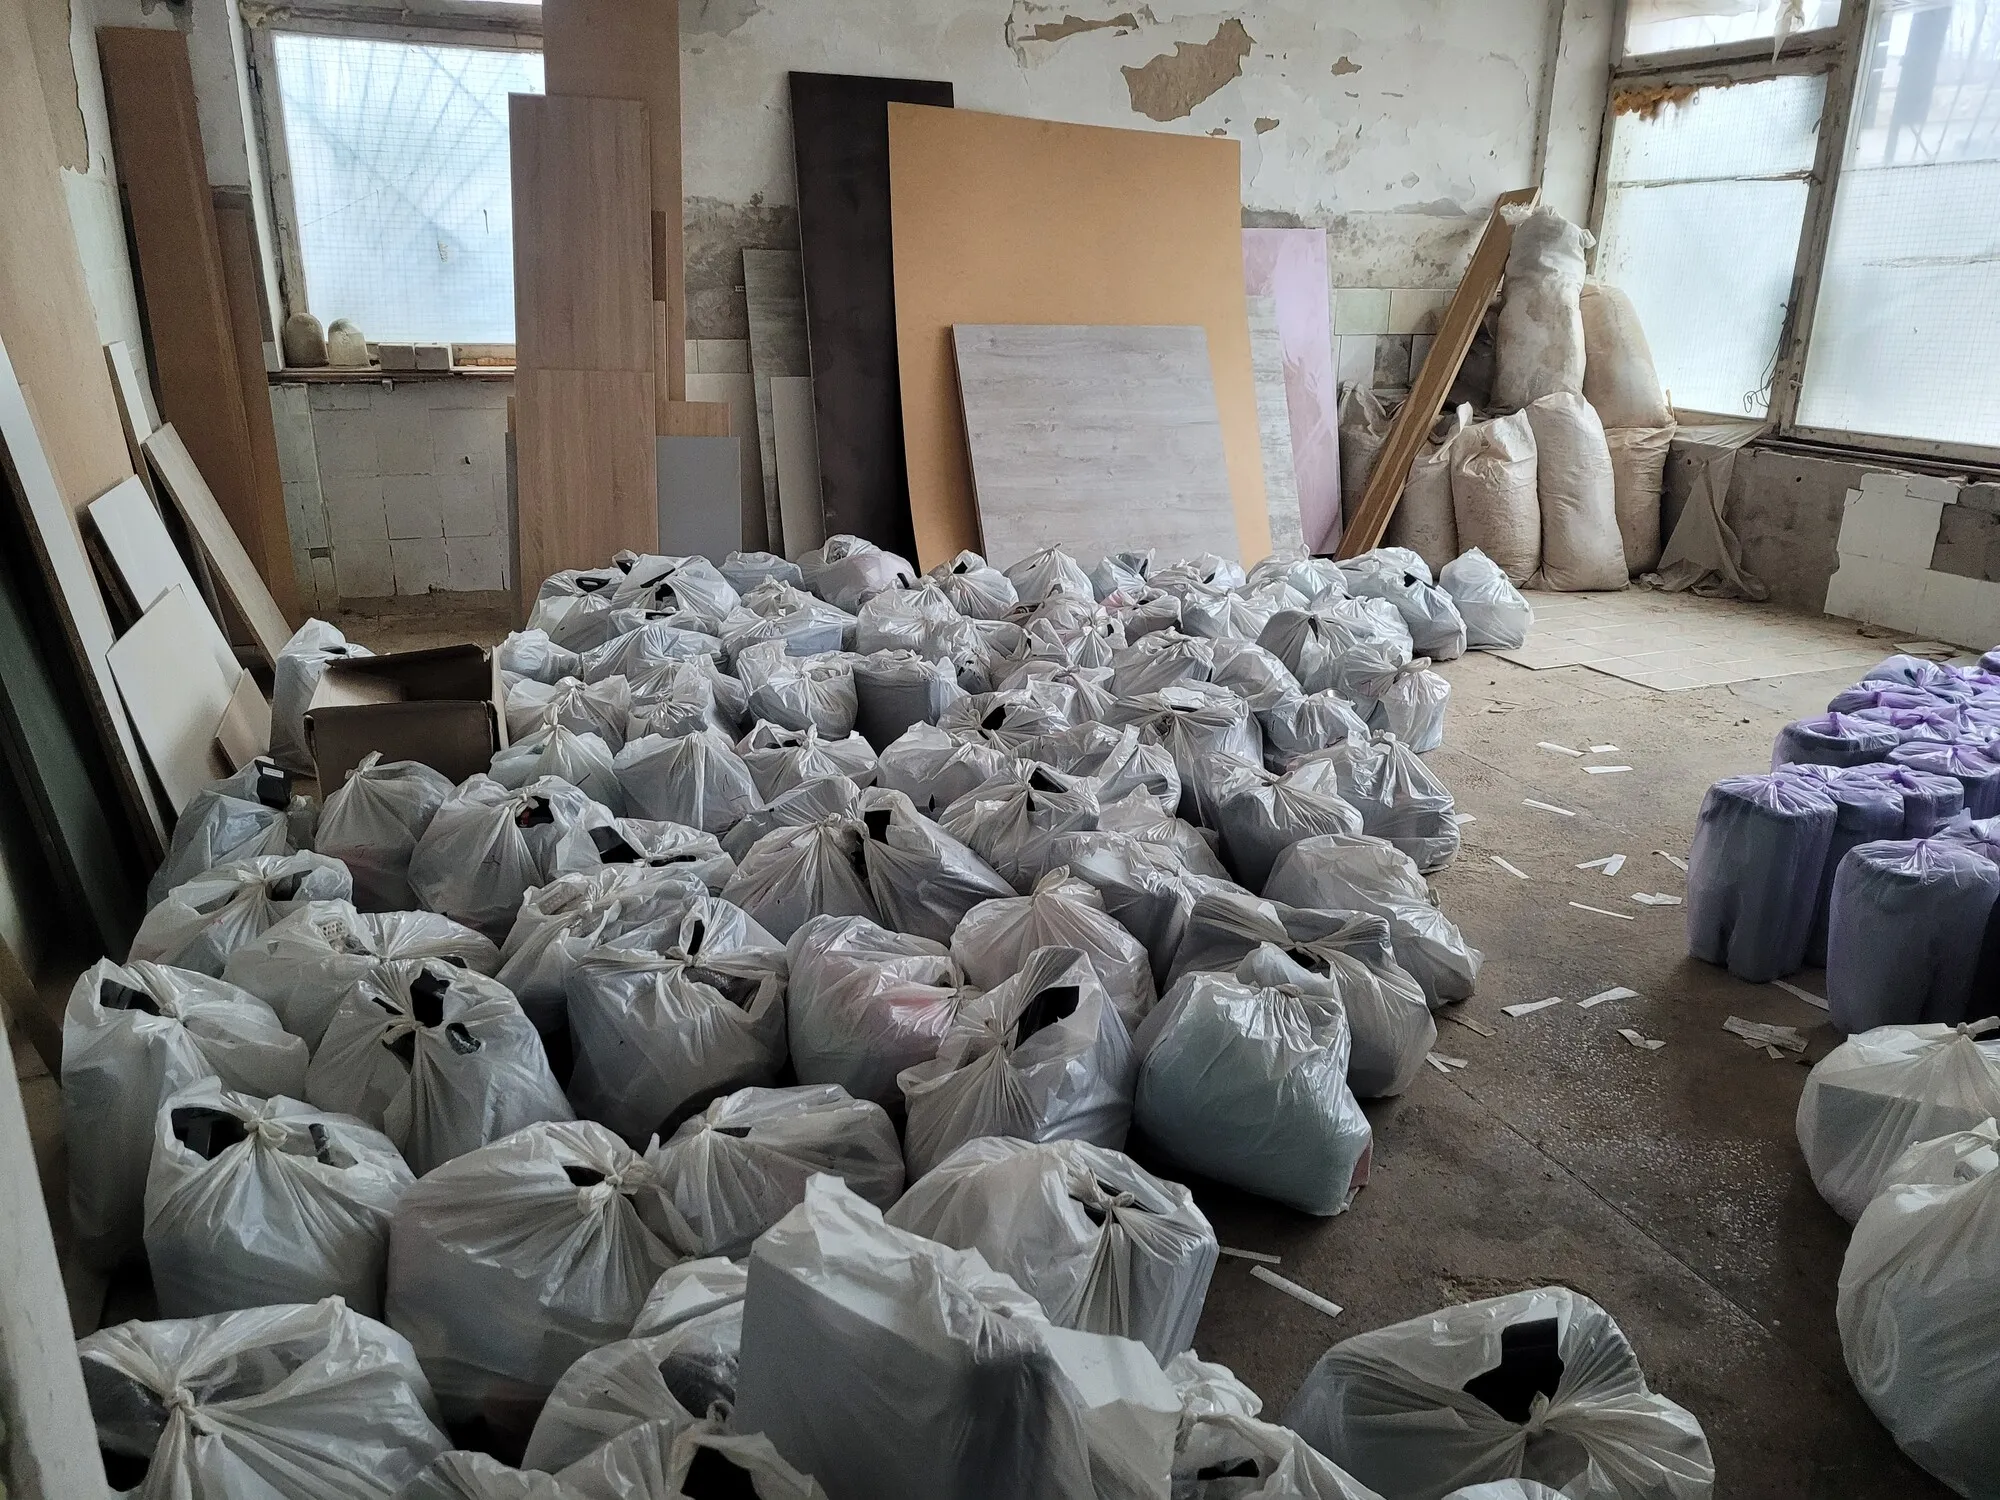 A room filed with bags of supplies